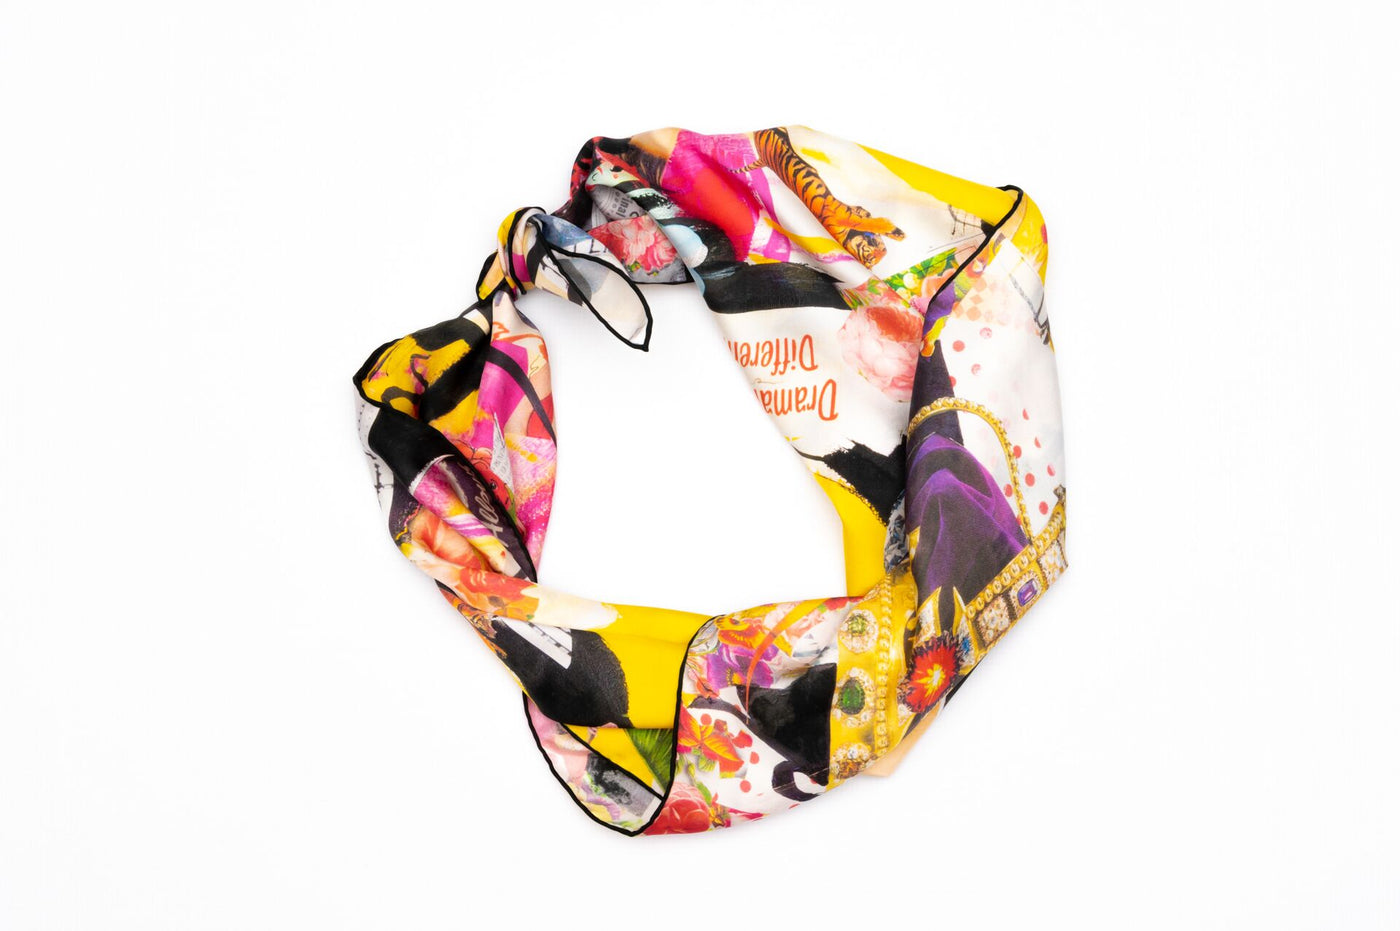 Salute To Youth large silk scarf